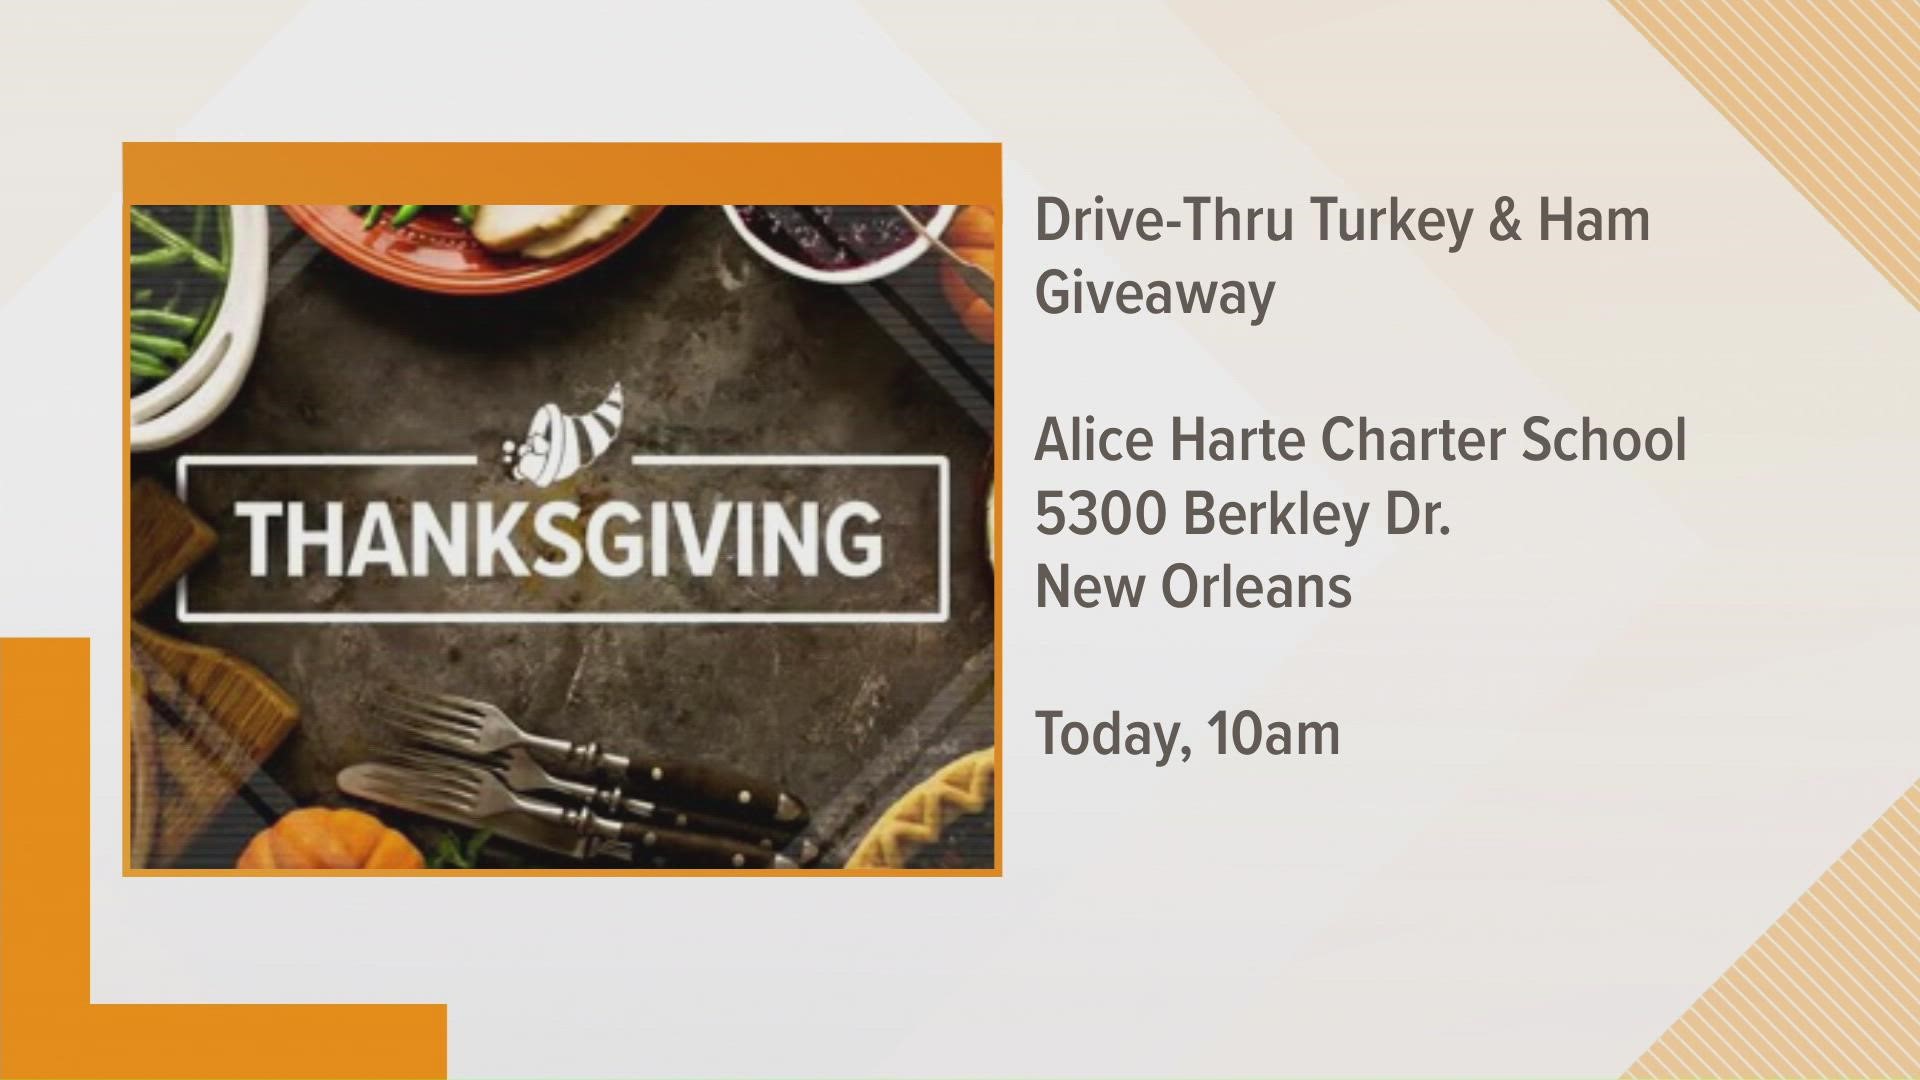 The drive-thru giveaway starts at 10 a.m. at Alice Harte Charter School